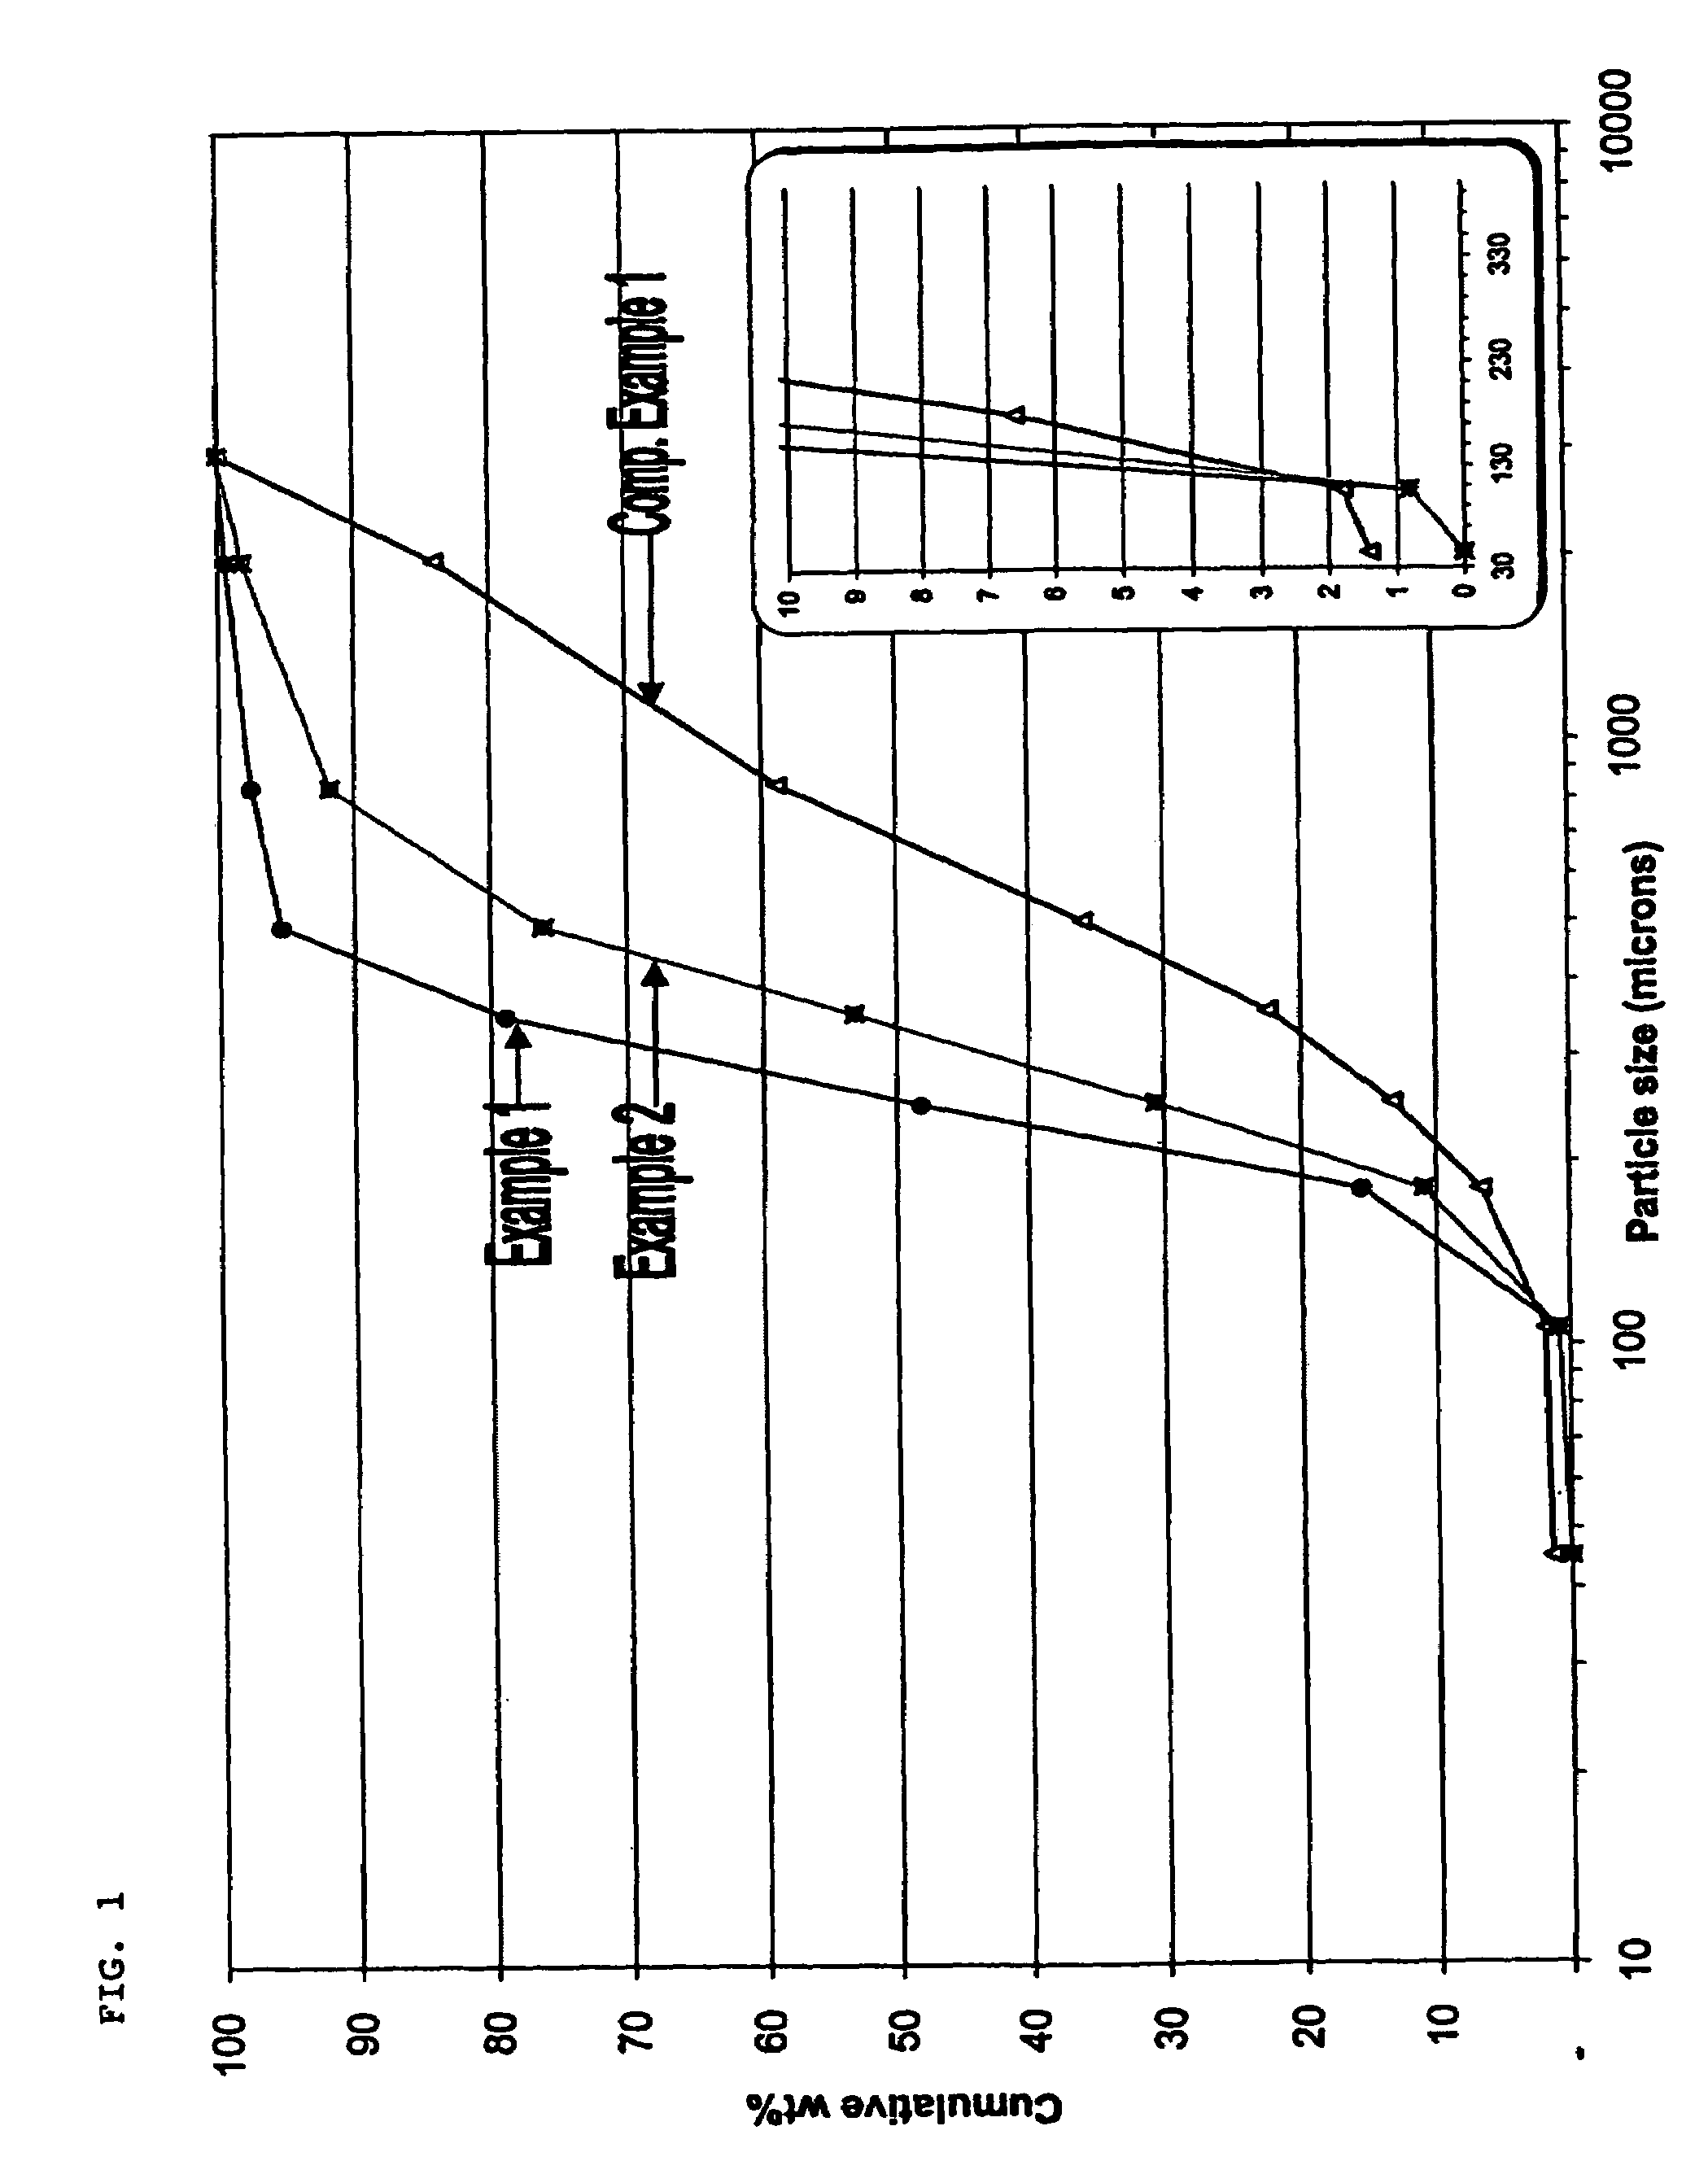 Process for forming a ziegler-natta catalyst system having a controlled morphology